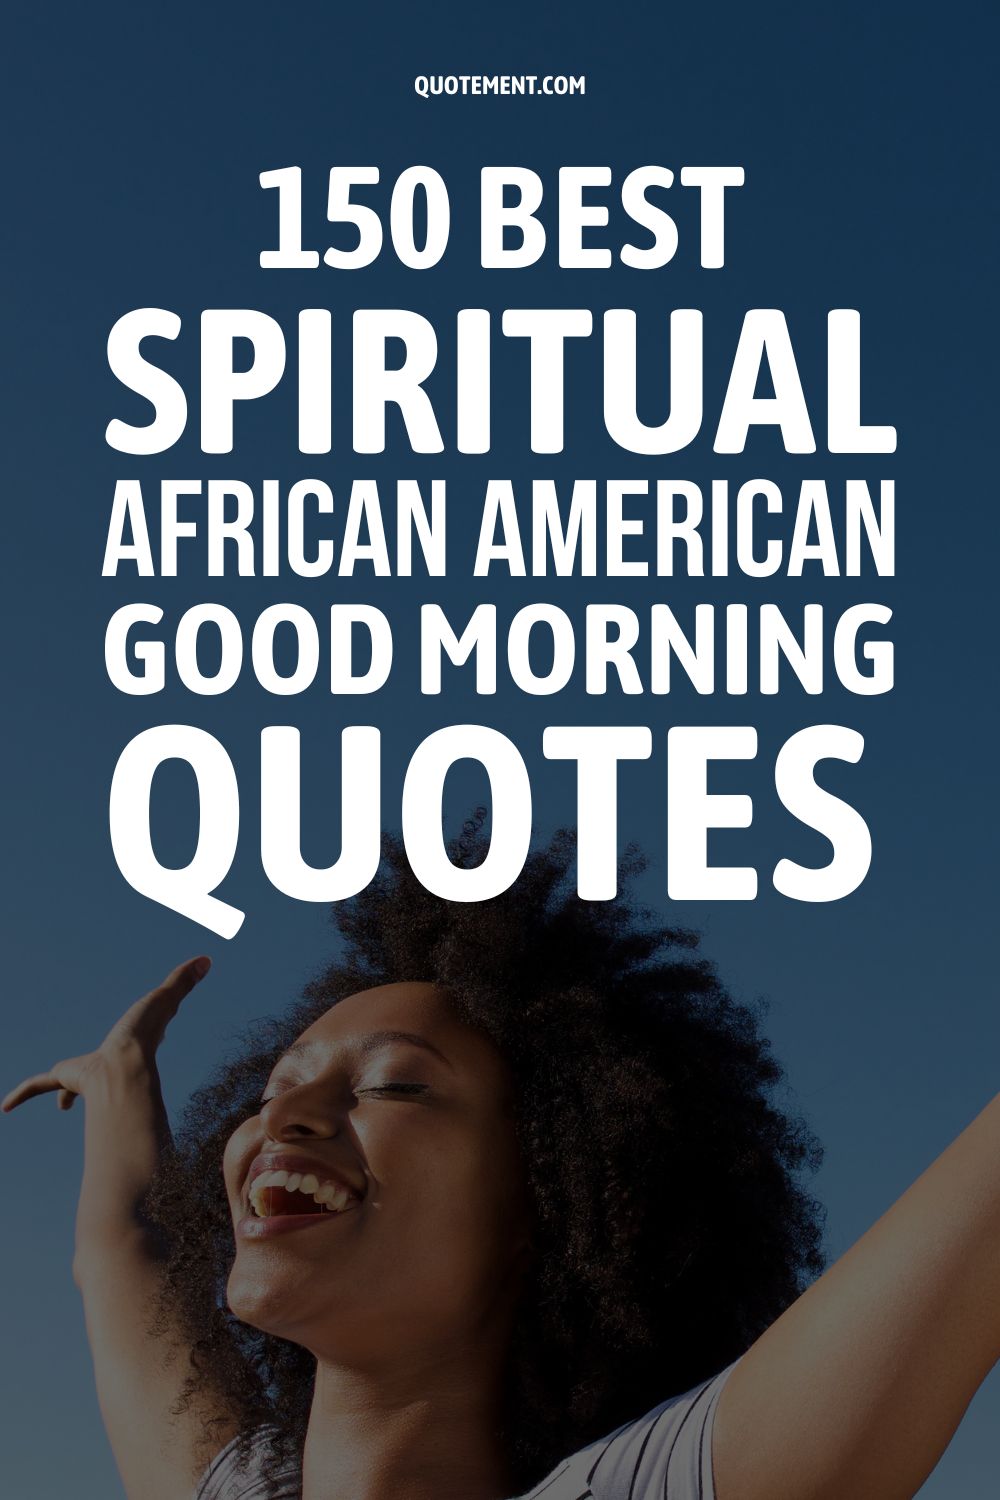 150 Best Spiritual African American Good Morning Quotes